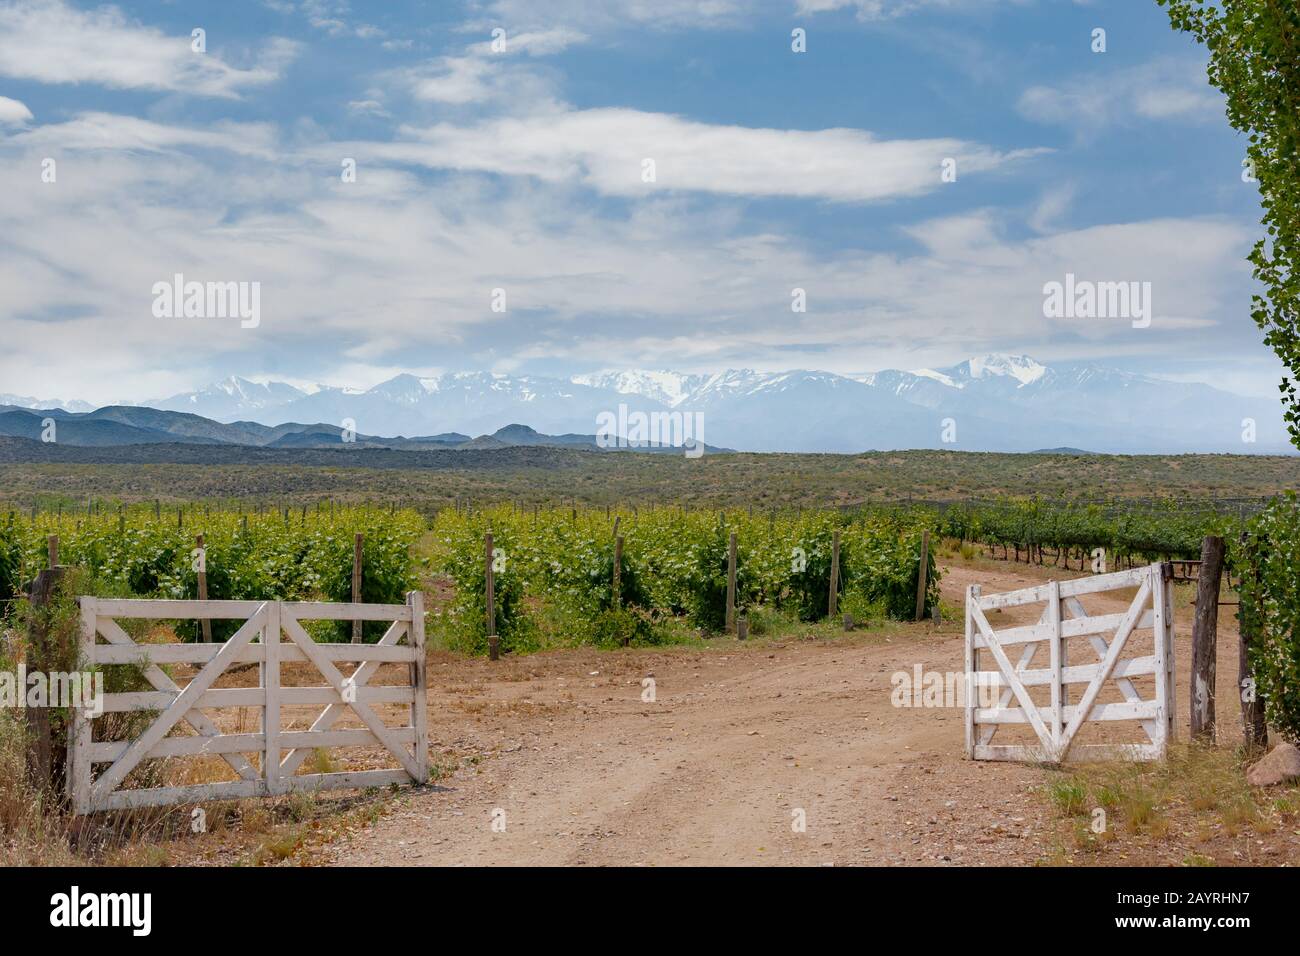 Picturesque rural scenery of wooden gate entrance to vineyard with  snowy peak mountains in the background. Spring season in Uco Valley, Mendoza, Arge Stock Photo